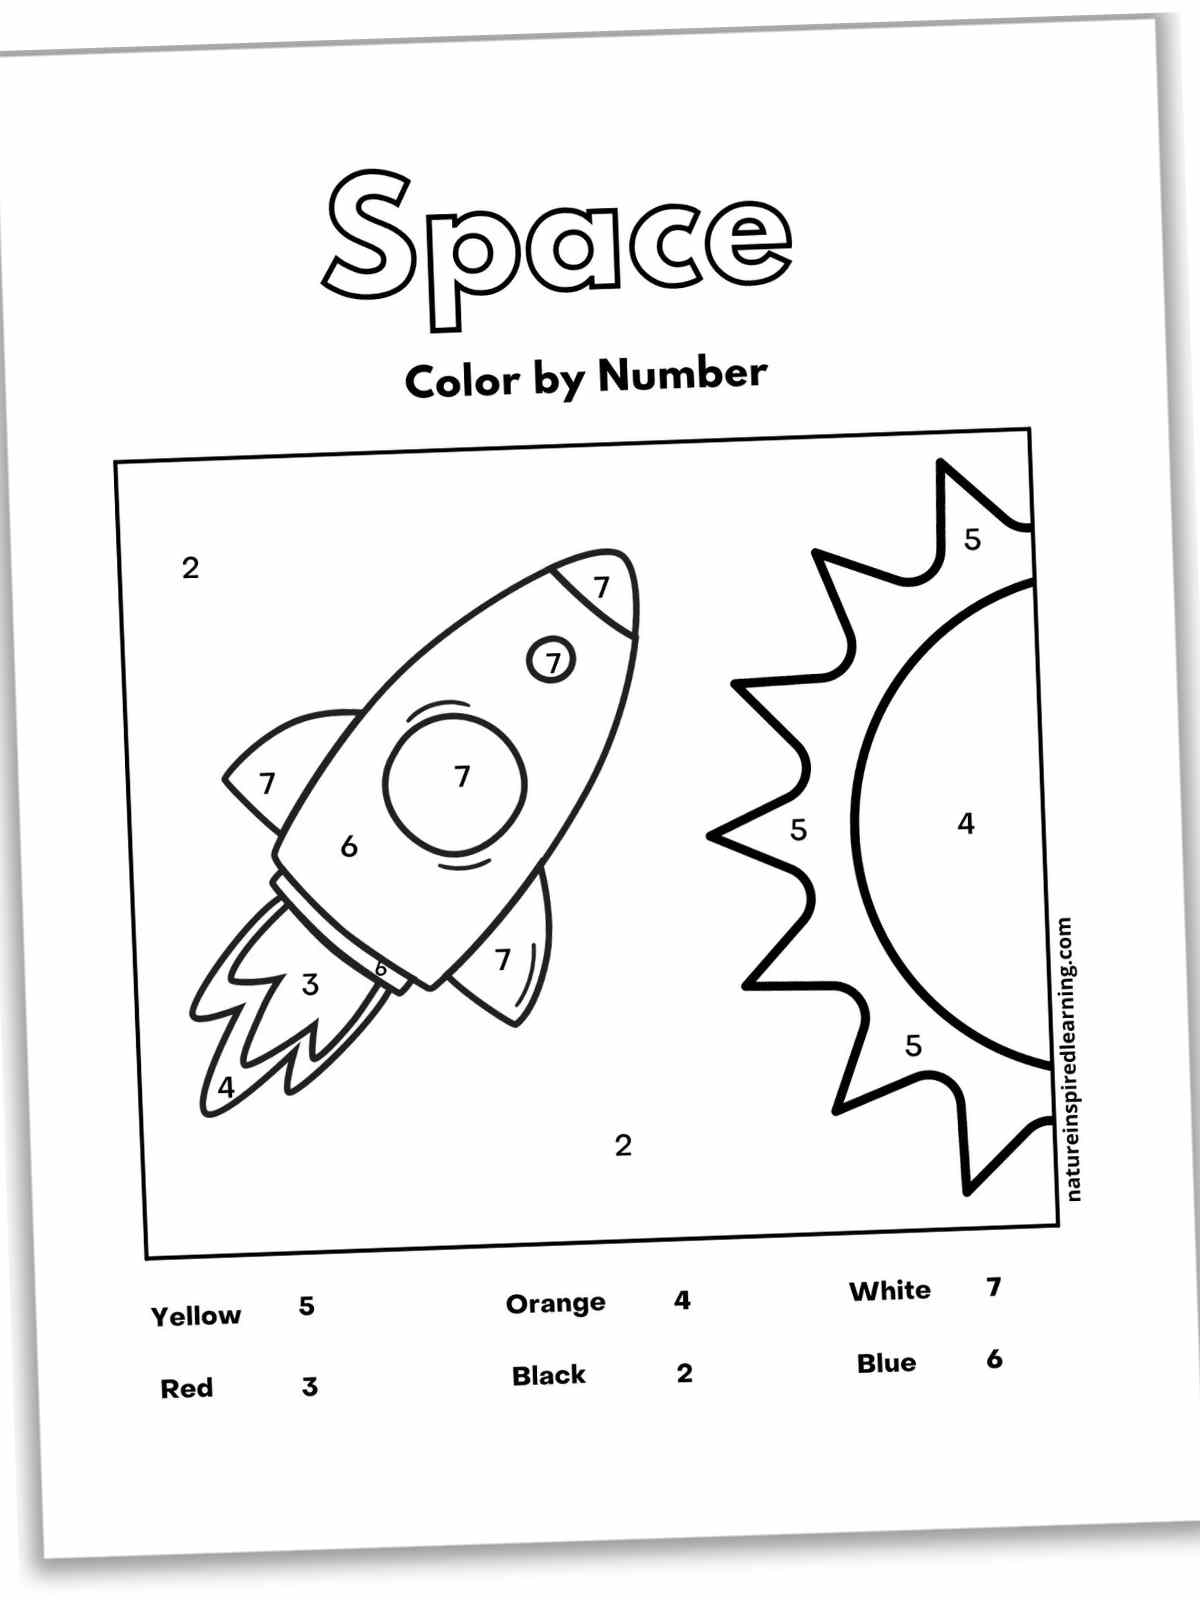 Black and white worksheet with Space written in outline form above the outline of a rocket ship and the sun. Number key at the bottom with numbers within the image.